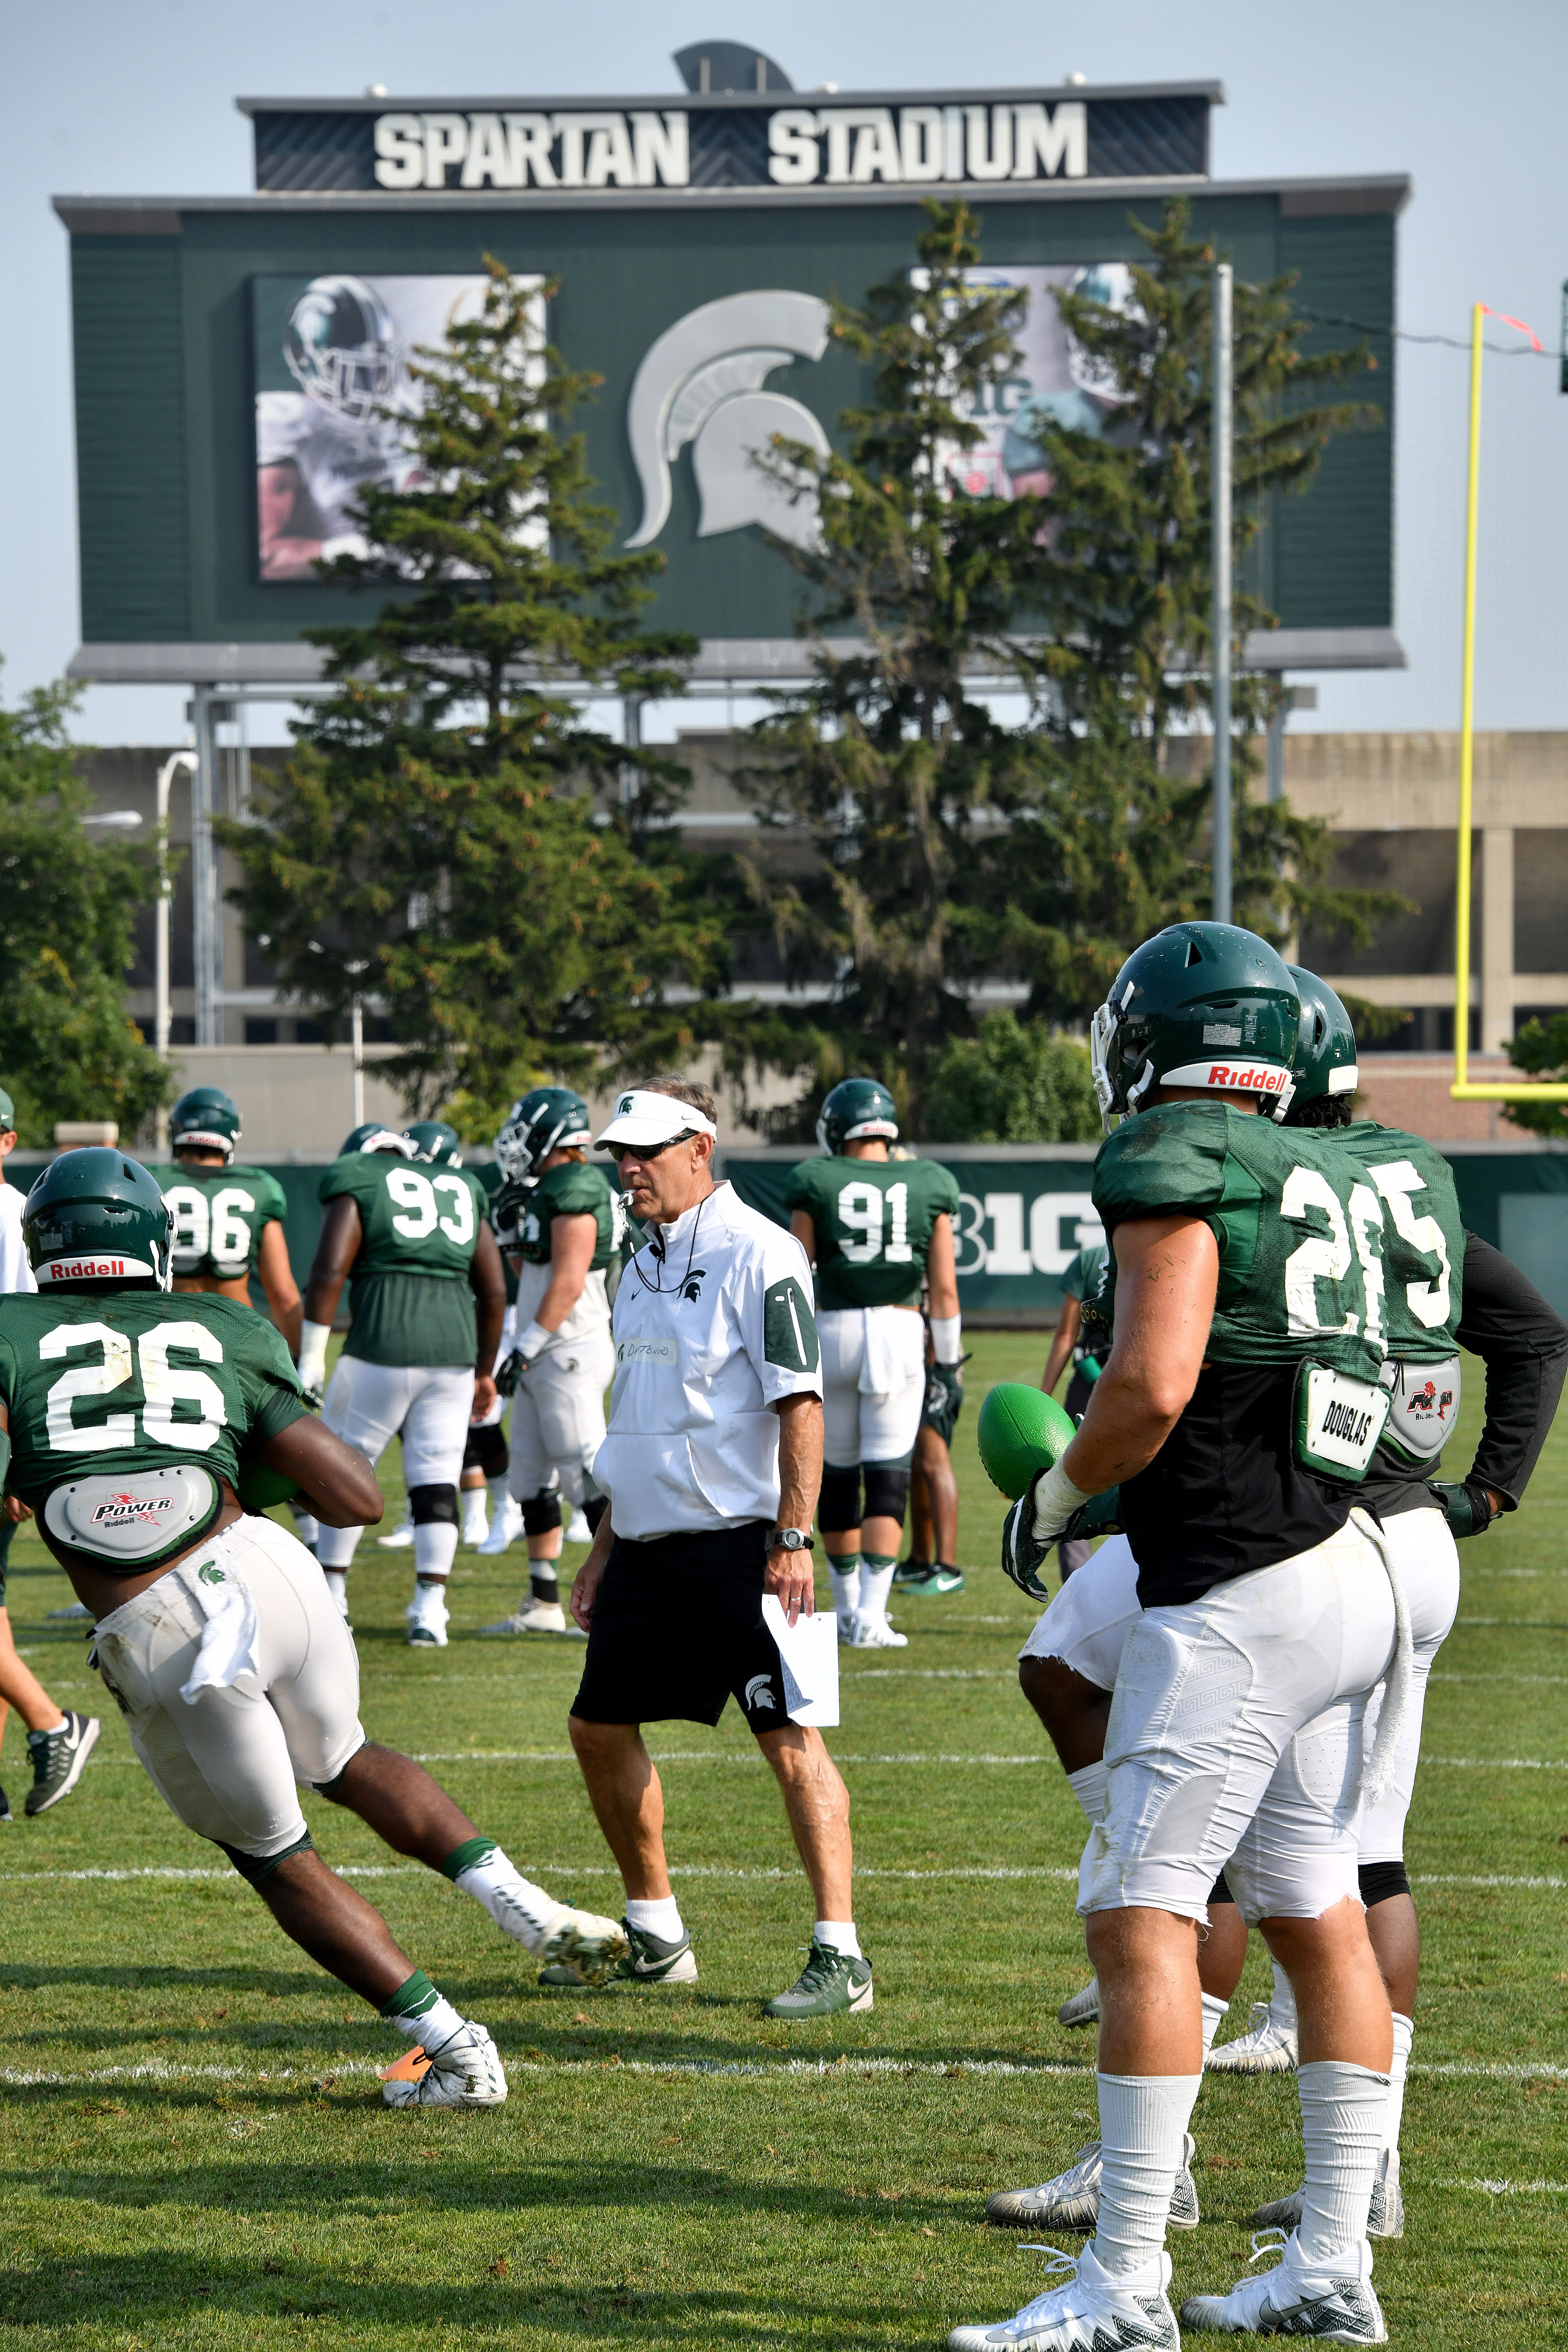 Michigan State head coach Mark Dantonio watches his players go through defensive drills during a morning practice session at MSU's football practice facility on Tuesday, Aug. 14, 2018.  In the background, Spartan Stadium awaits the season opener, Aug. 31 against Utah State.